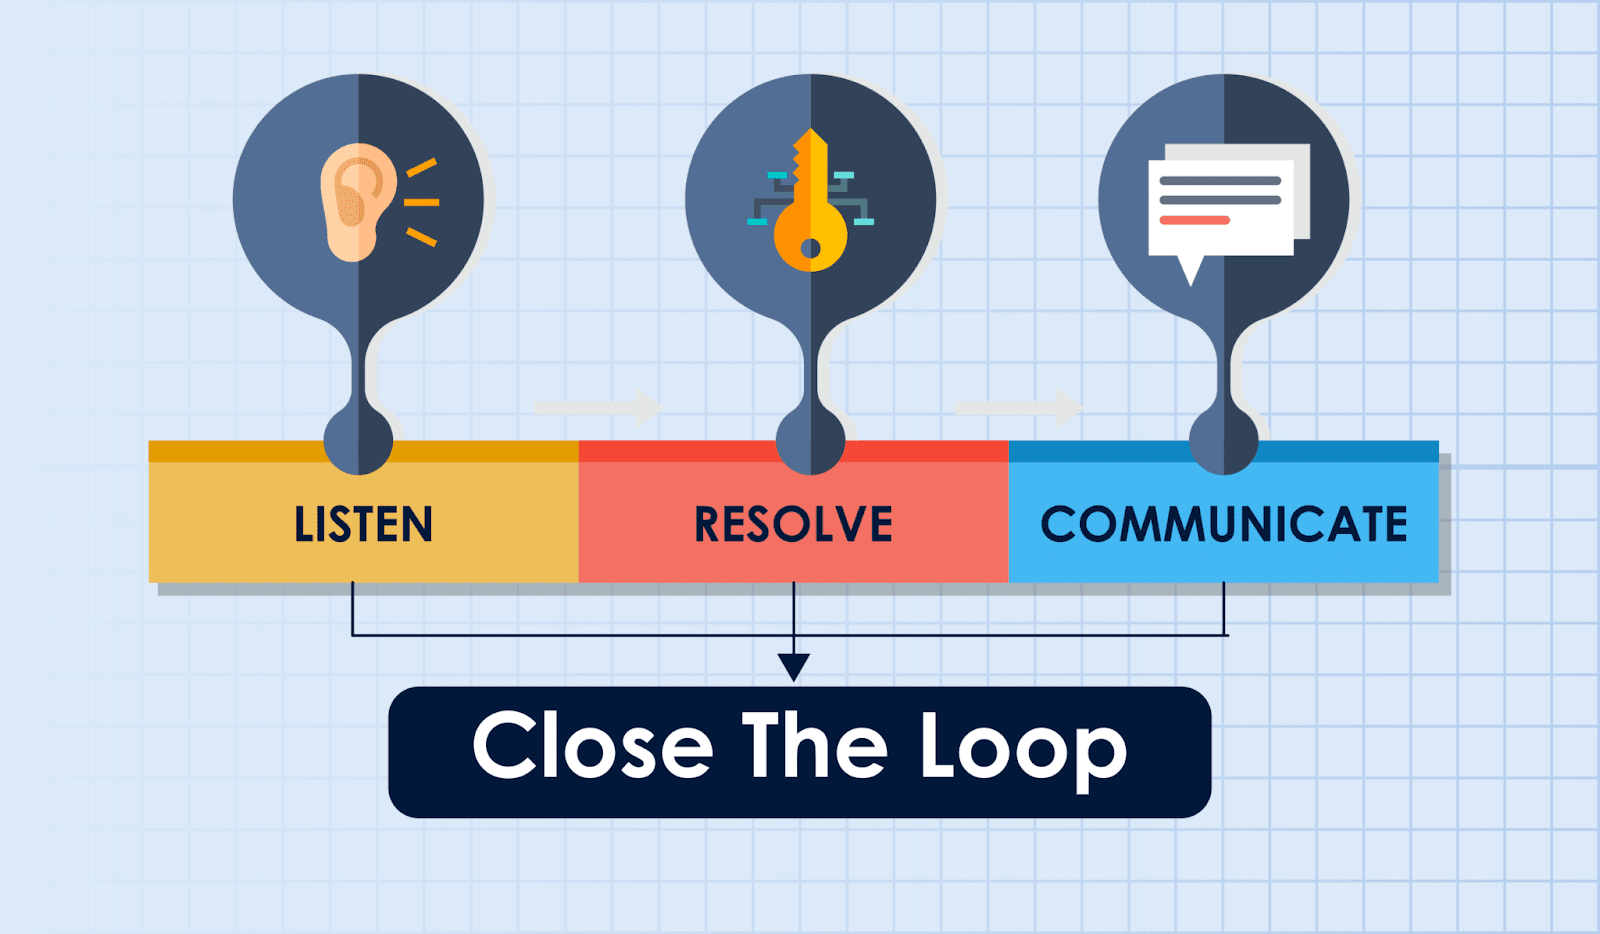 This is the pictorial representation of the close the feedback loop process where the process starts with listening, then resolving the issues, and finally communicating the changes. 